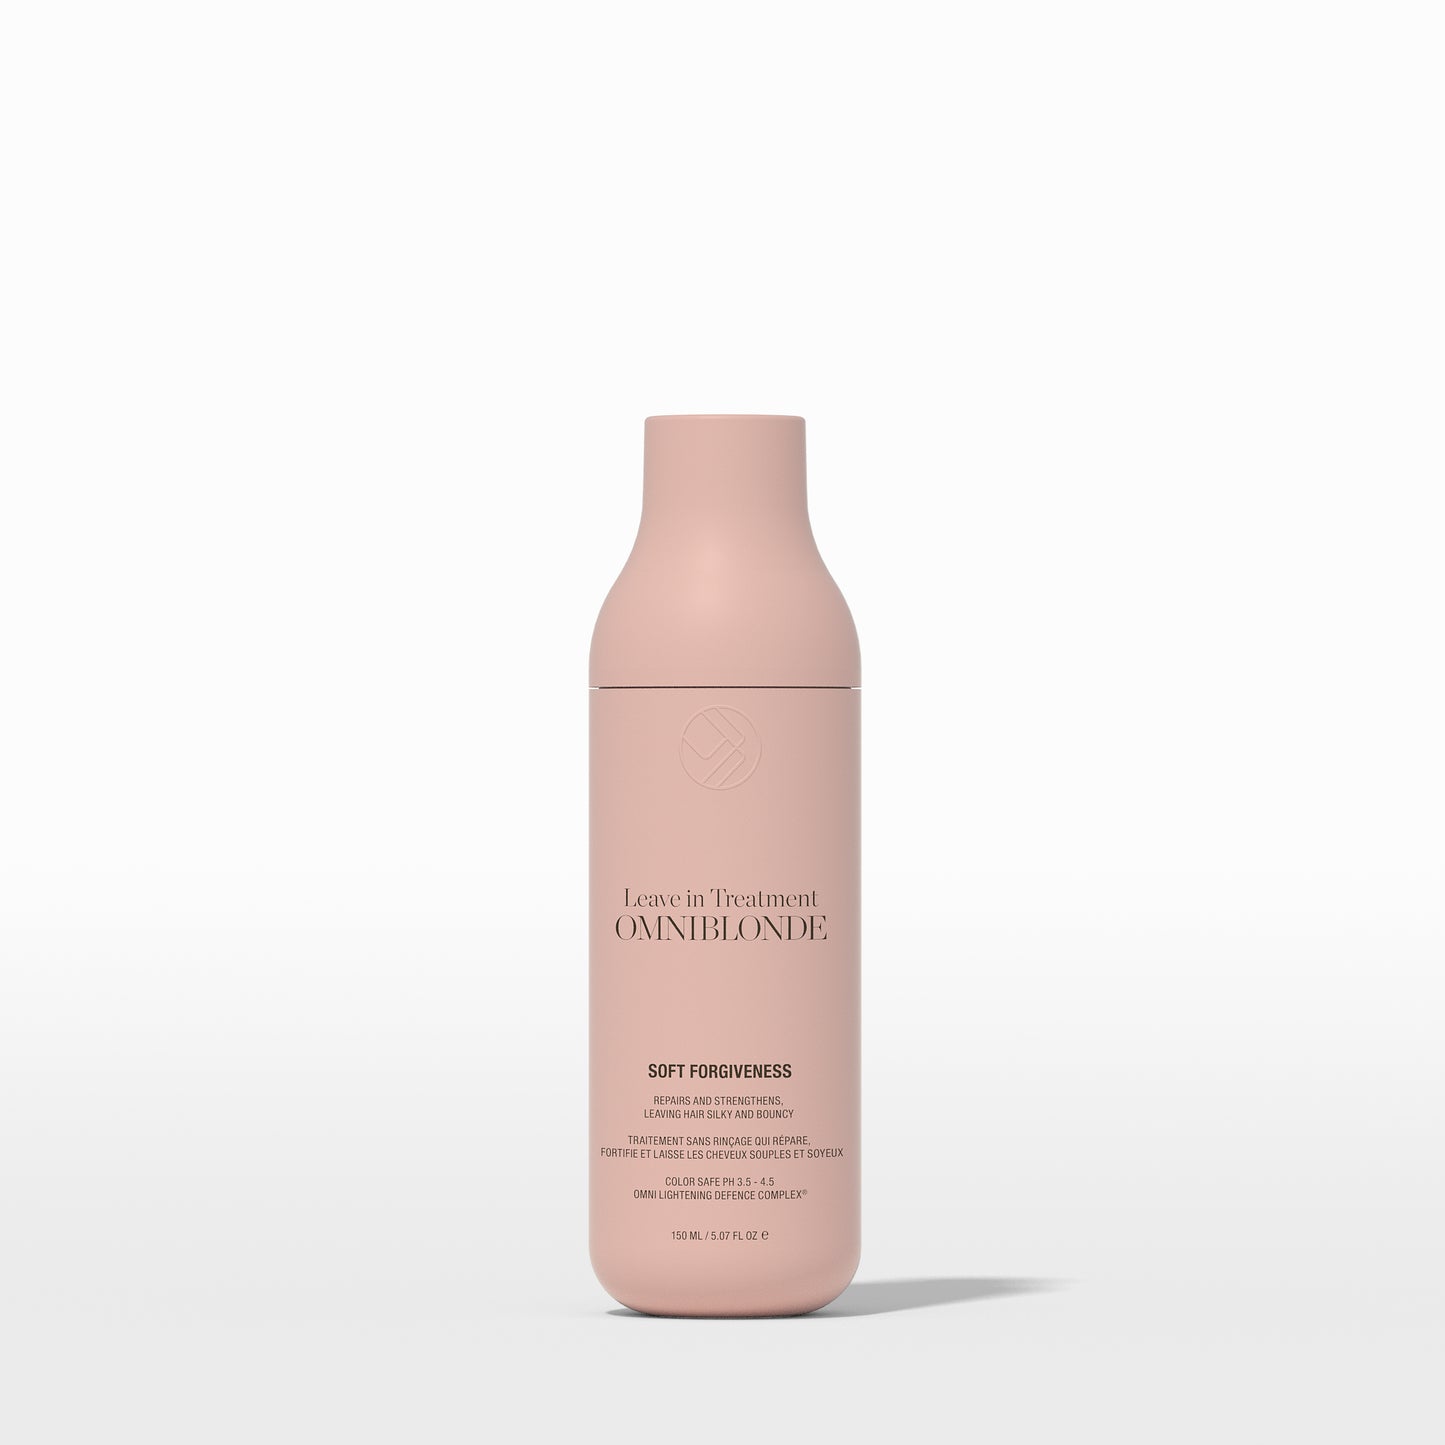 Omniblonde Leave-in Treatment Soft Forgiveness